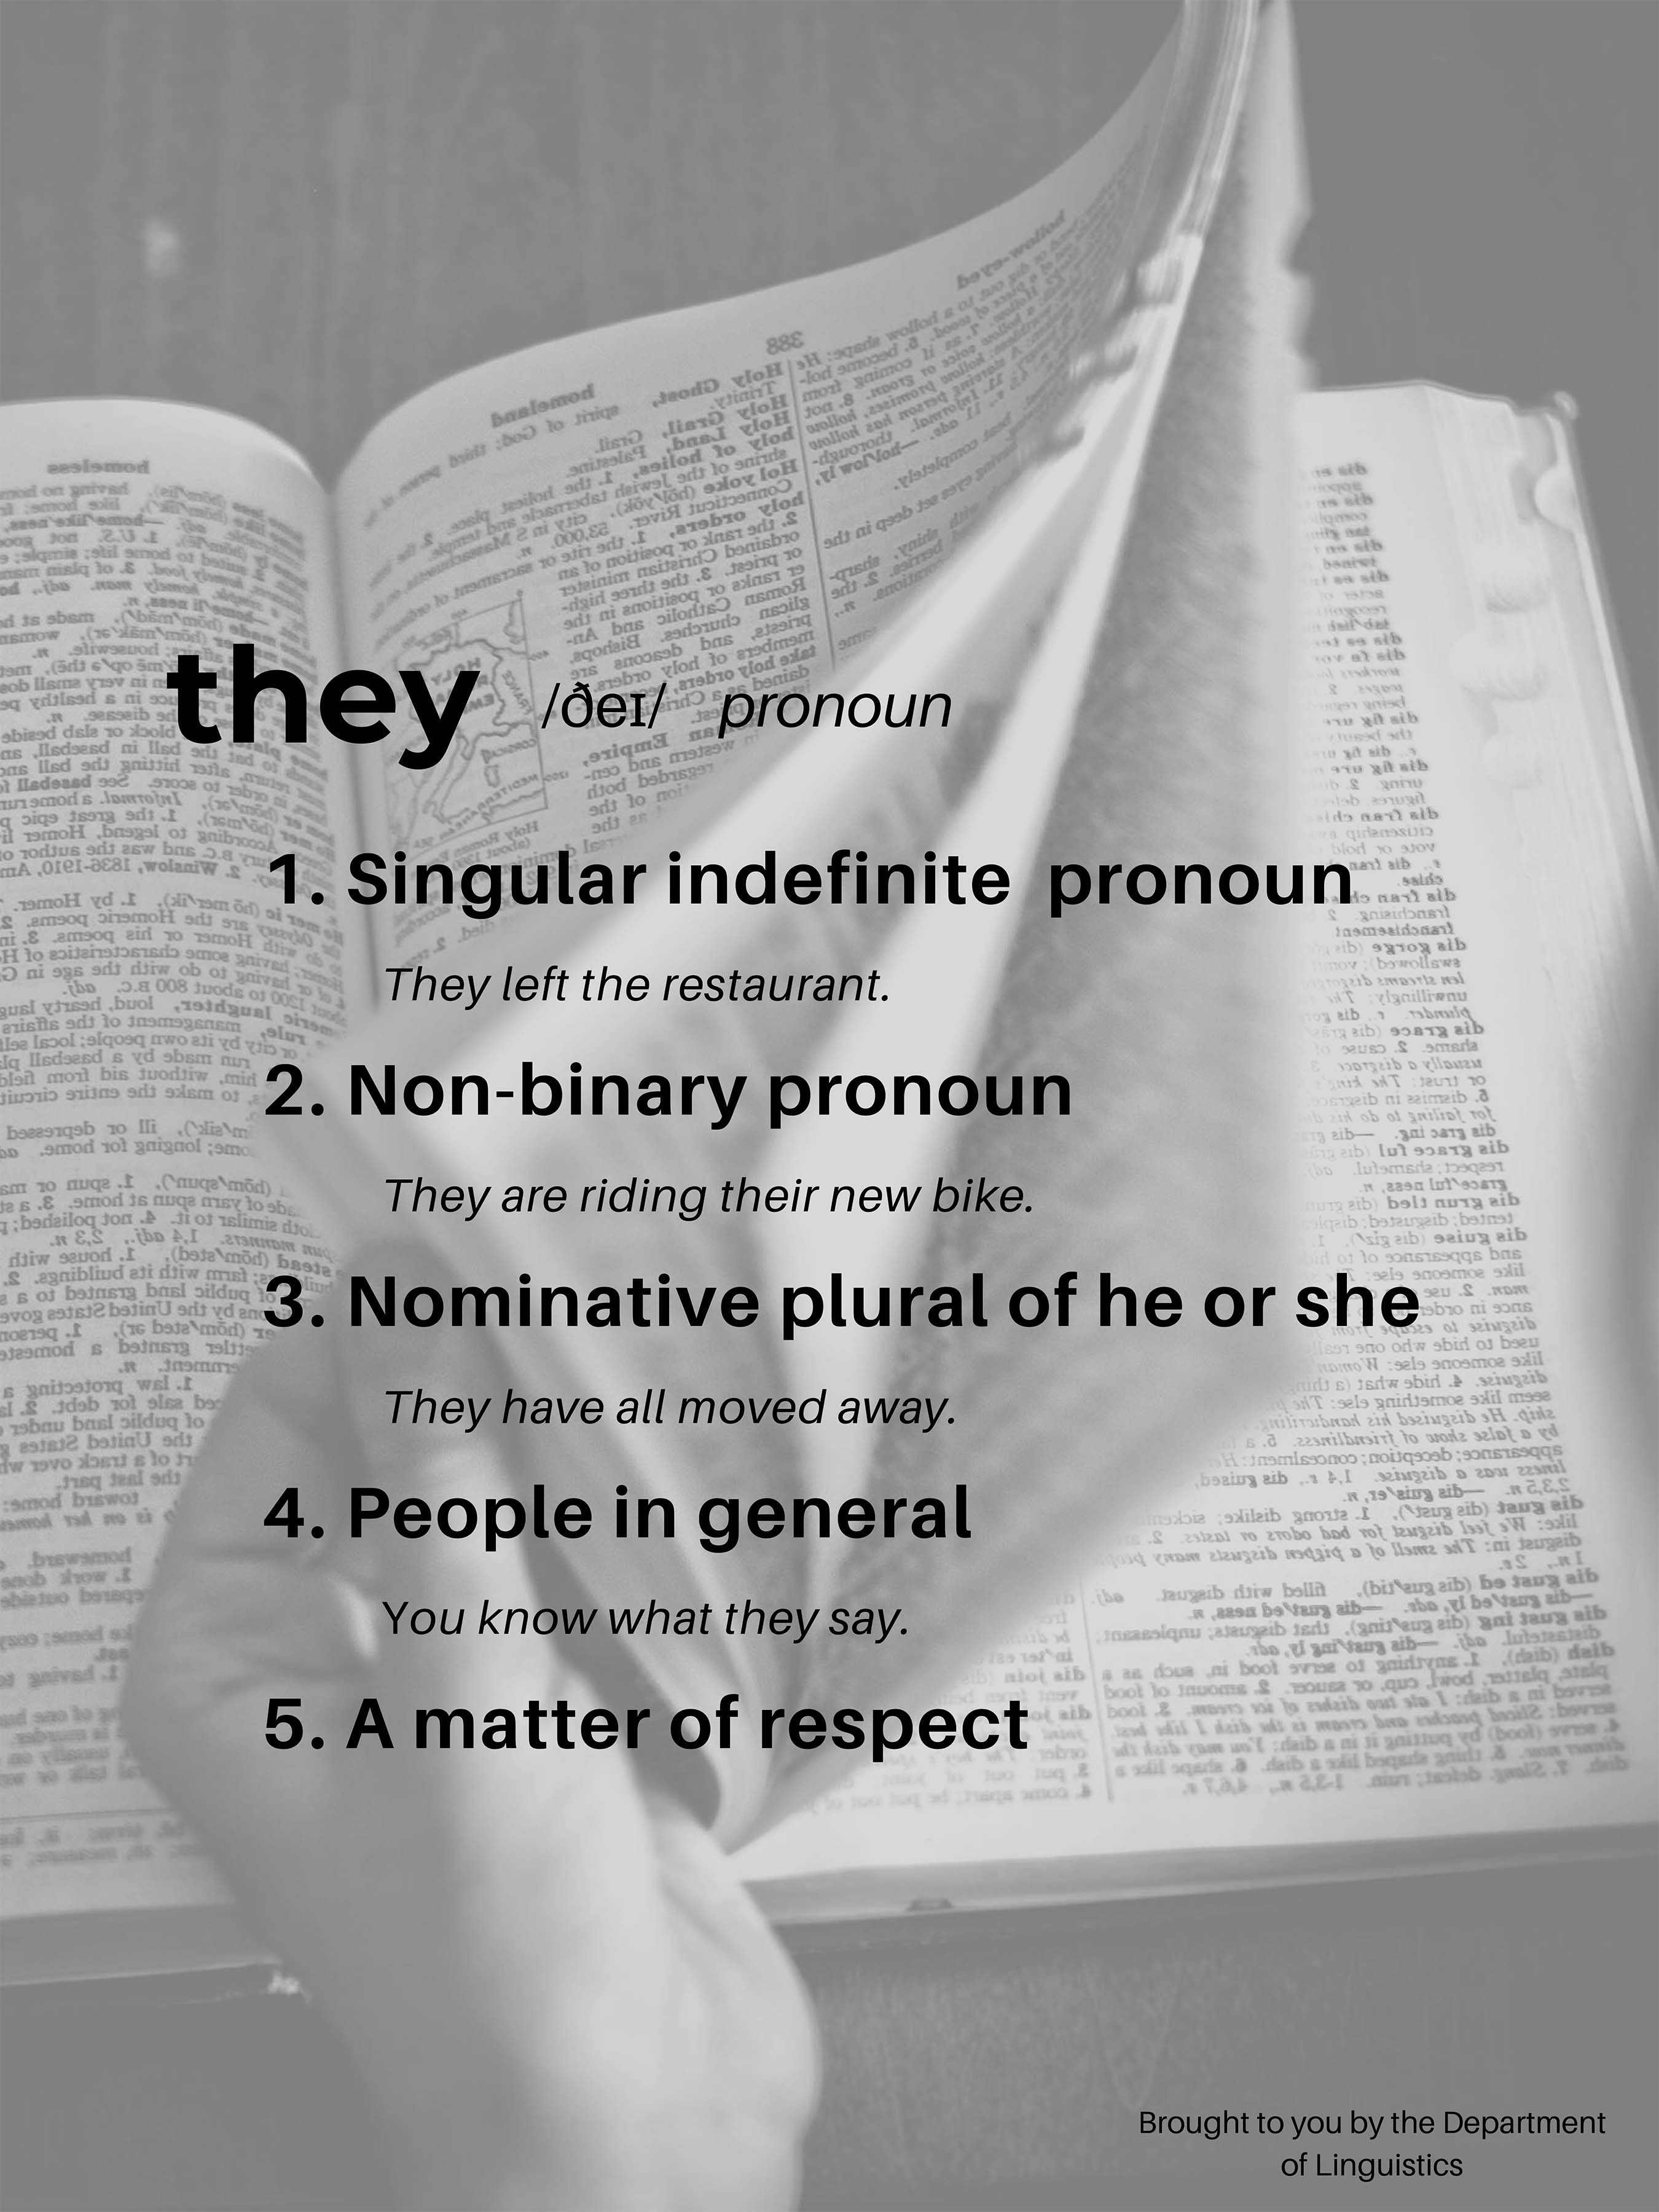 Definition of 'they.' Click image to see full description.